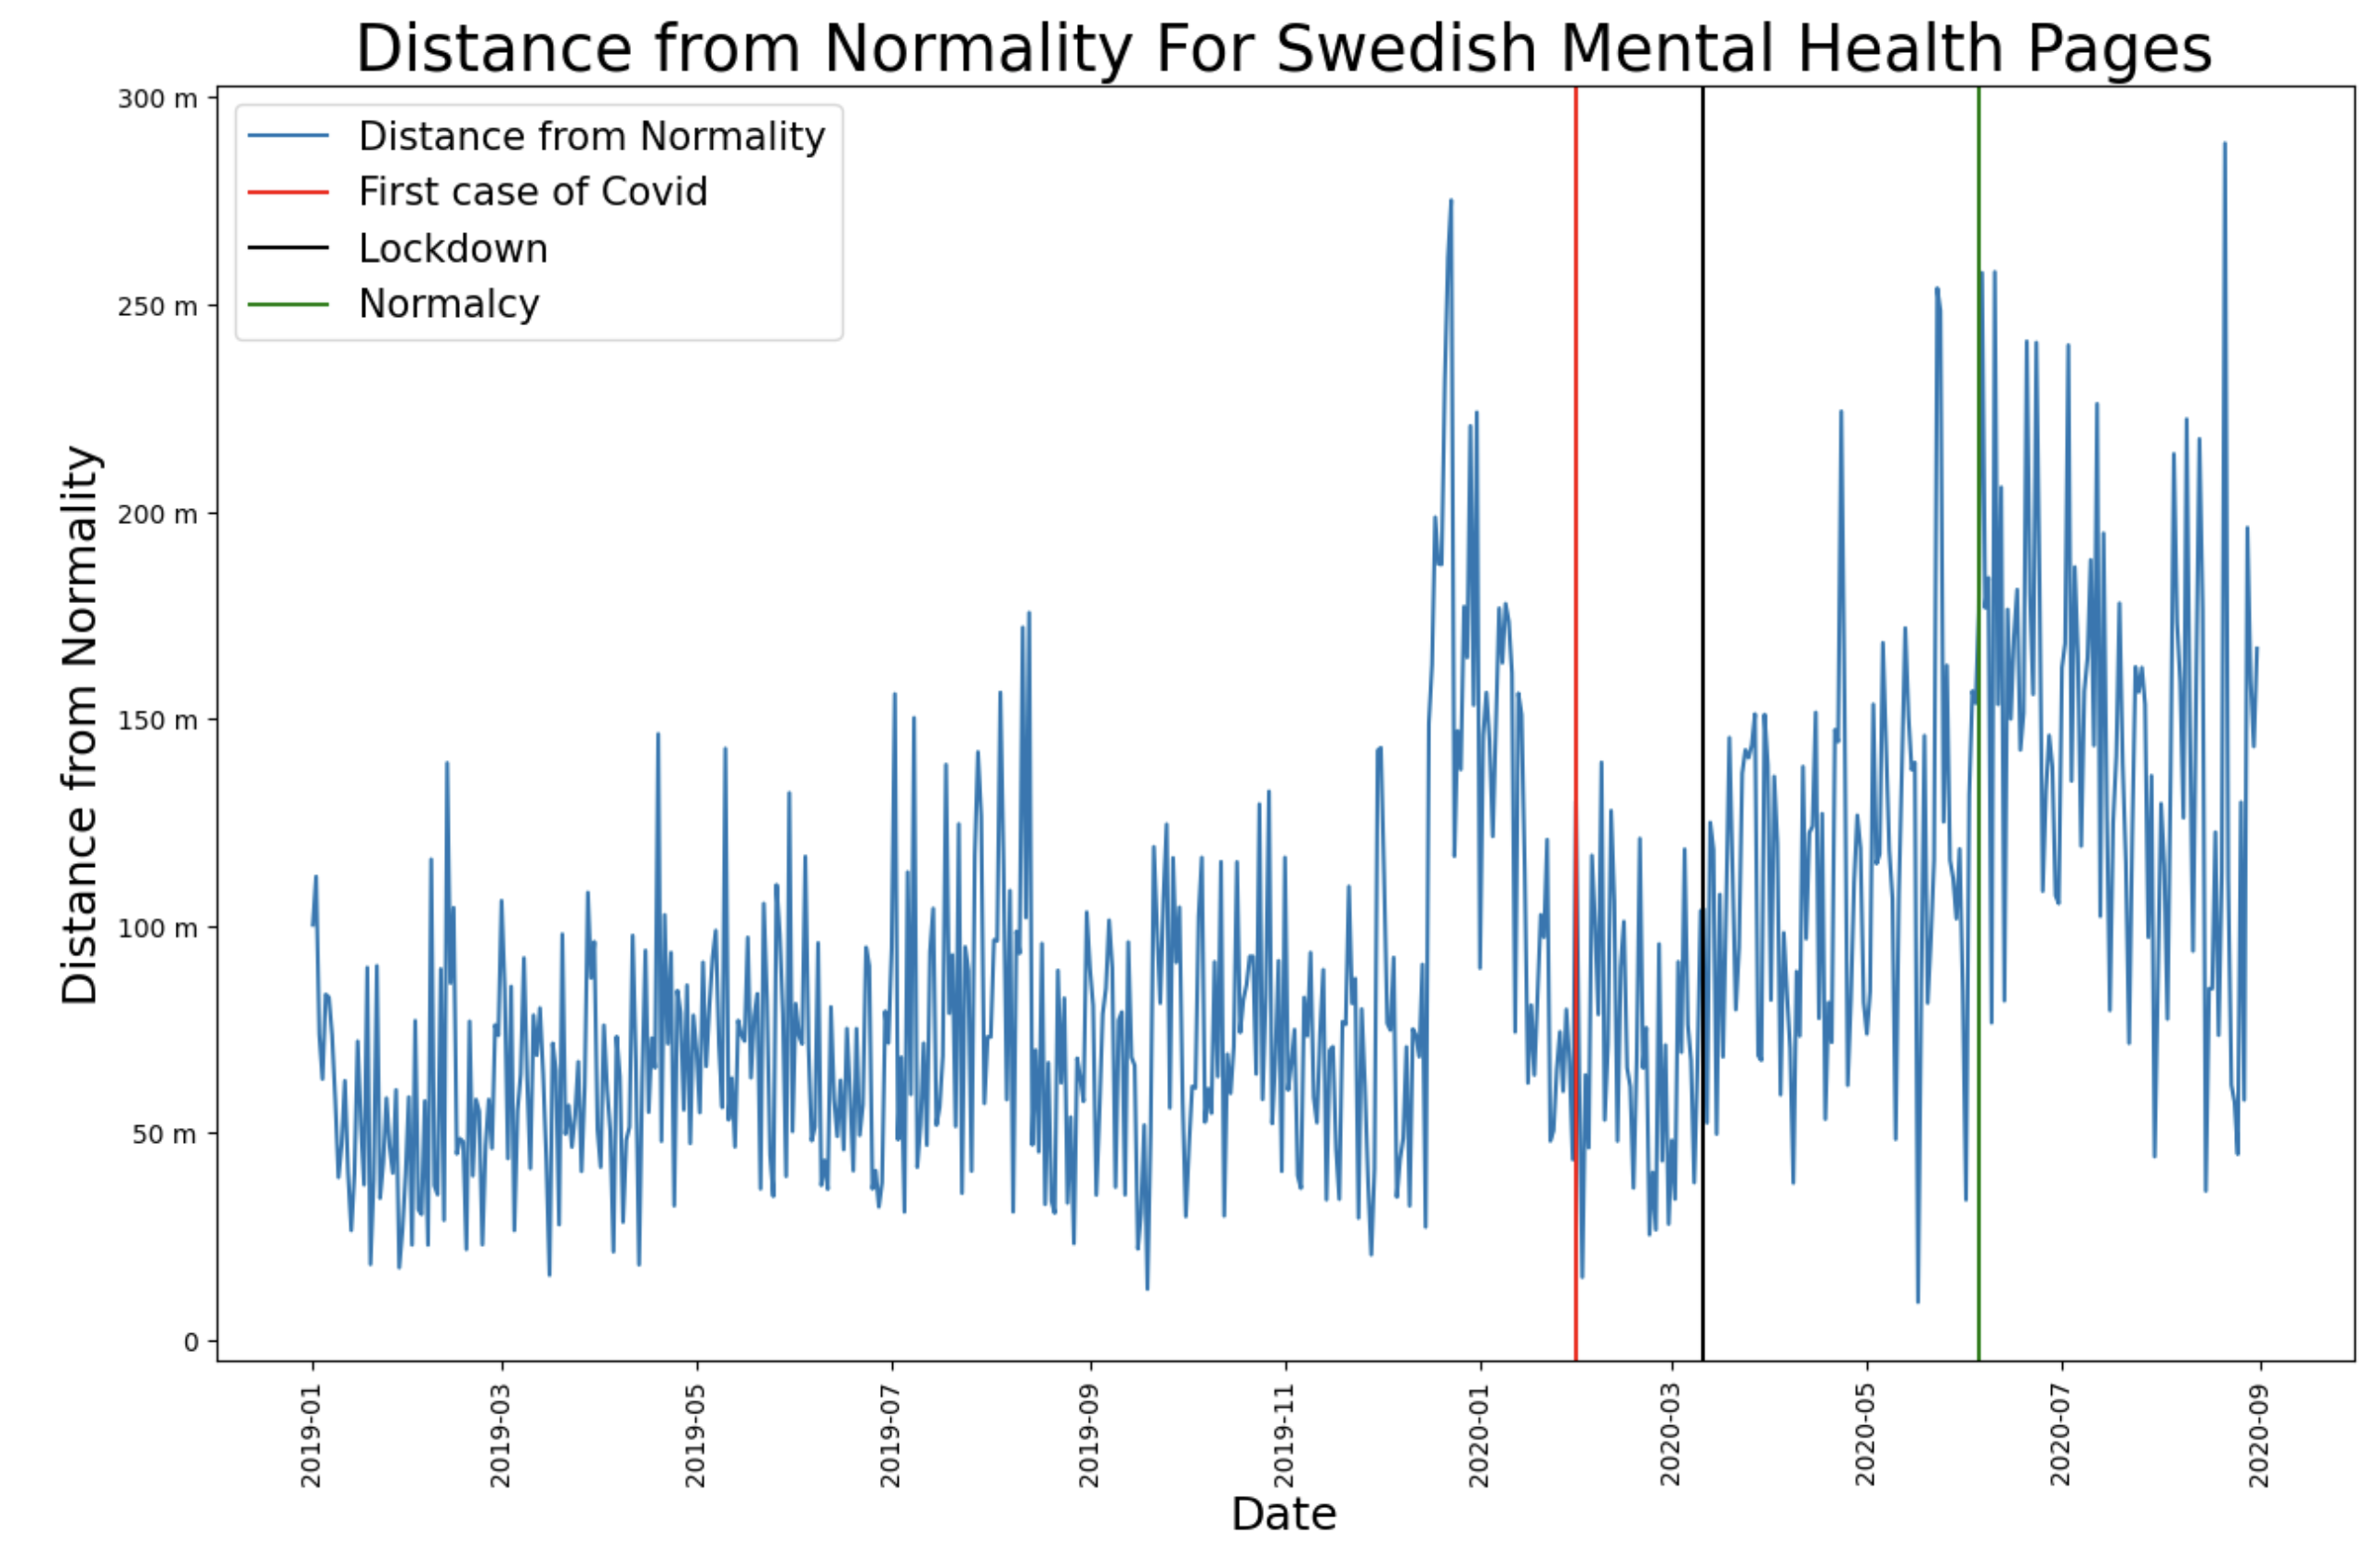 Distance from normality for mental health pages for Swedish